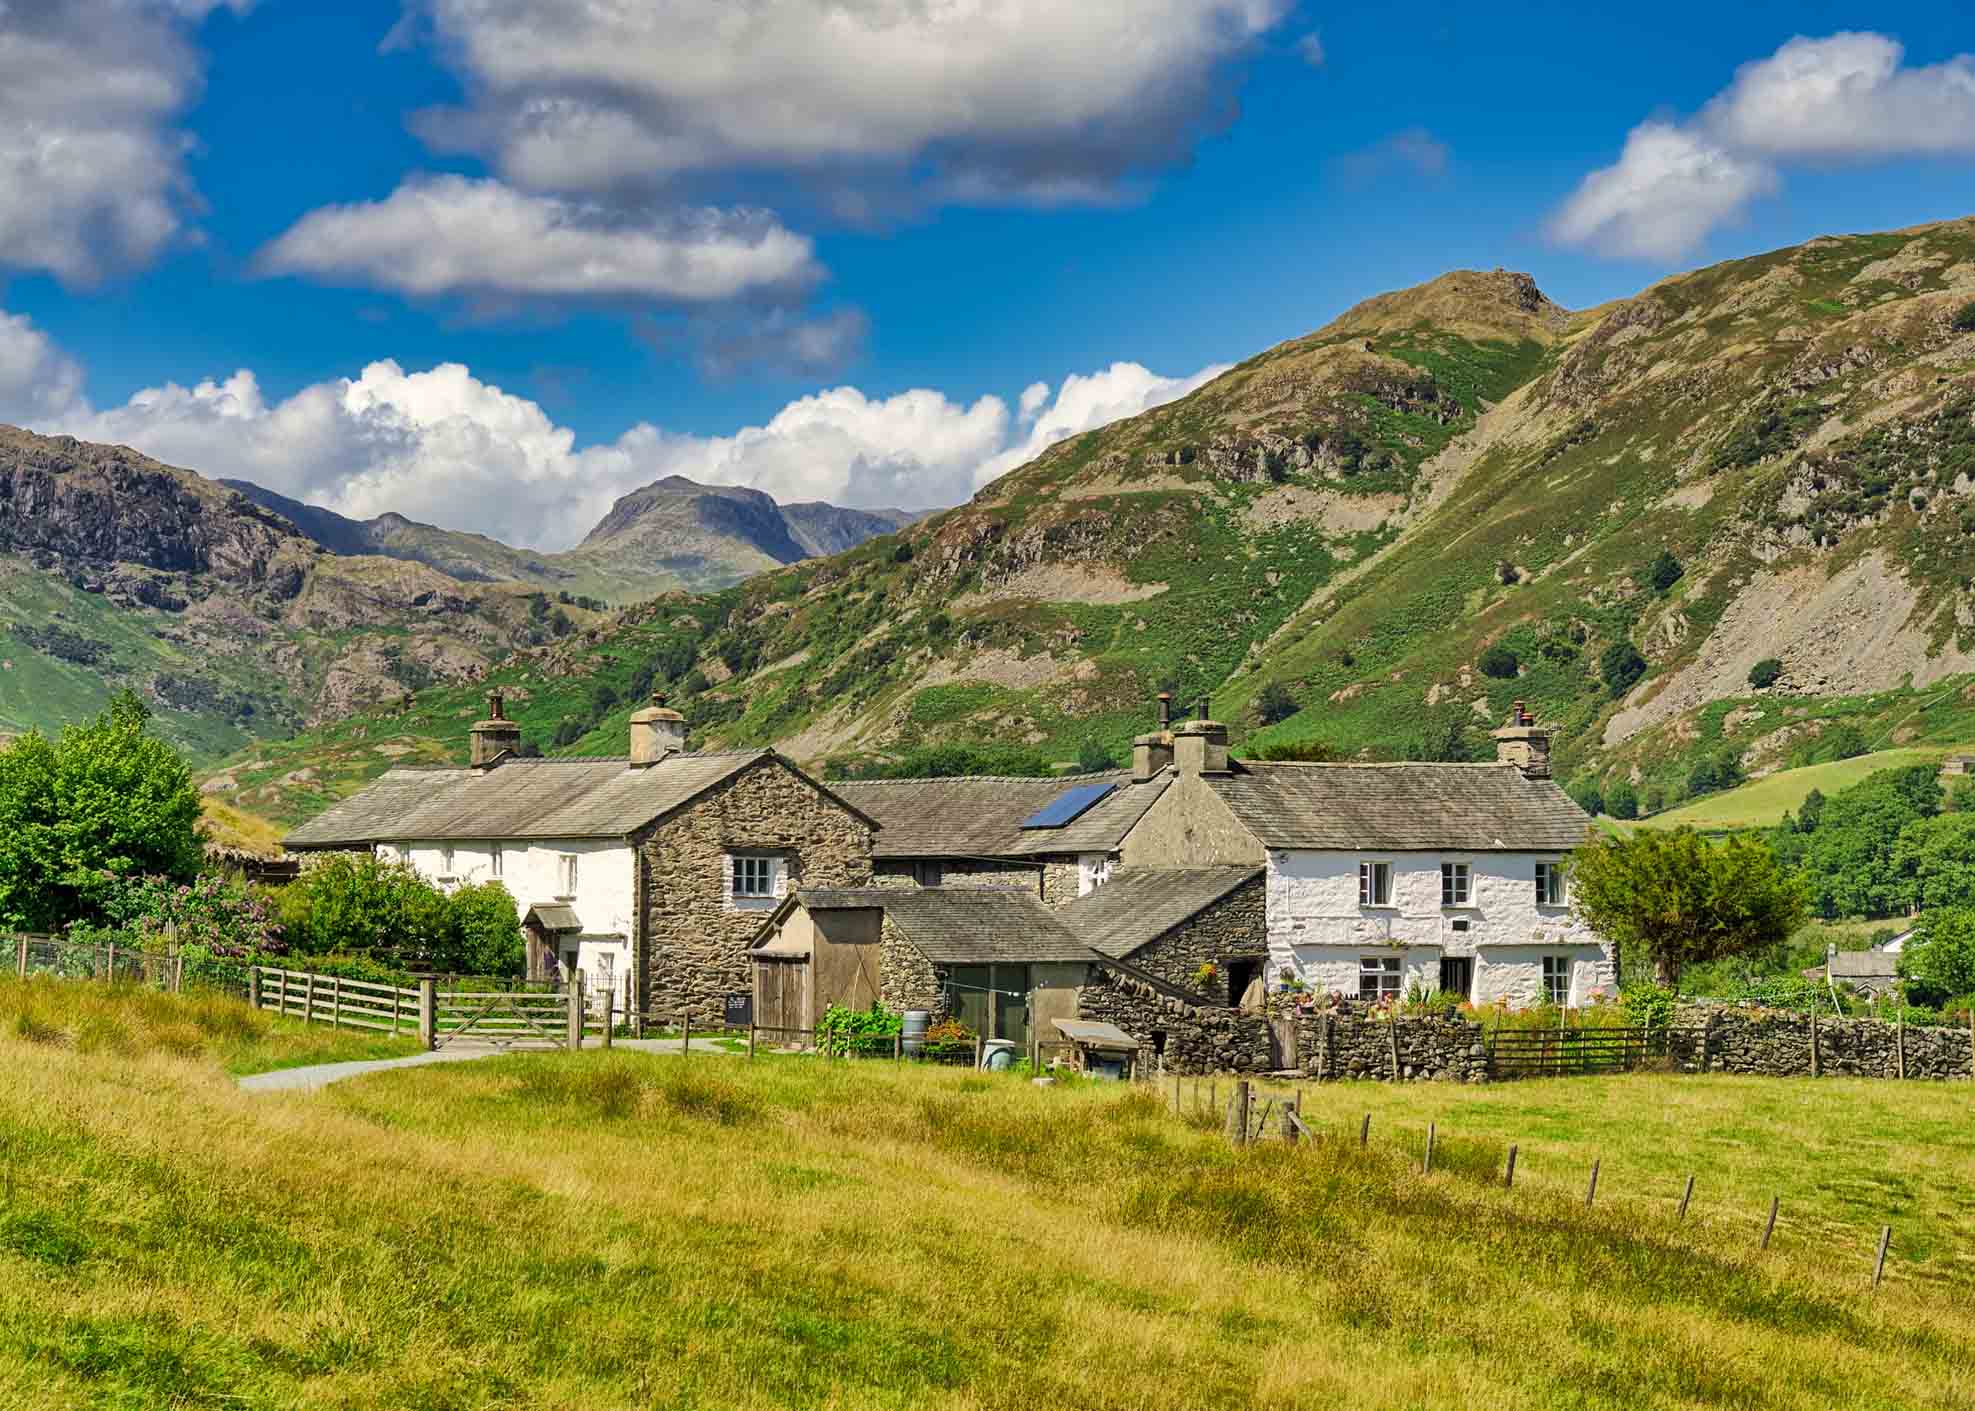 A group of traditional whitwashed cottages in the English Lake District, with Bowfell in the distance.